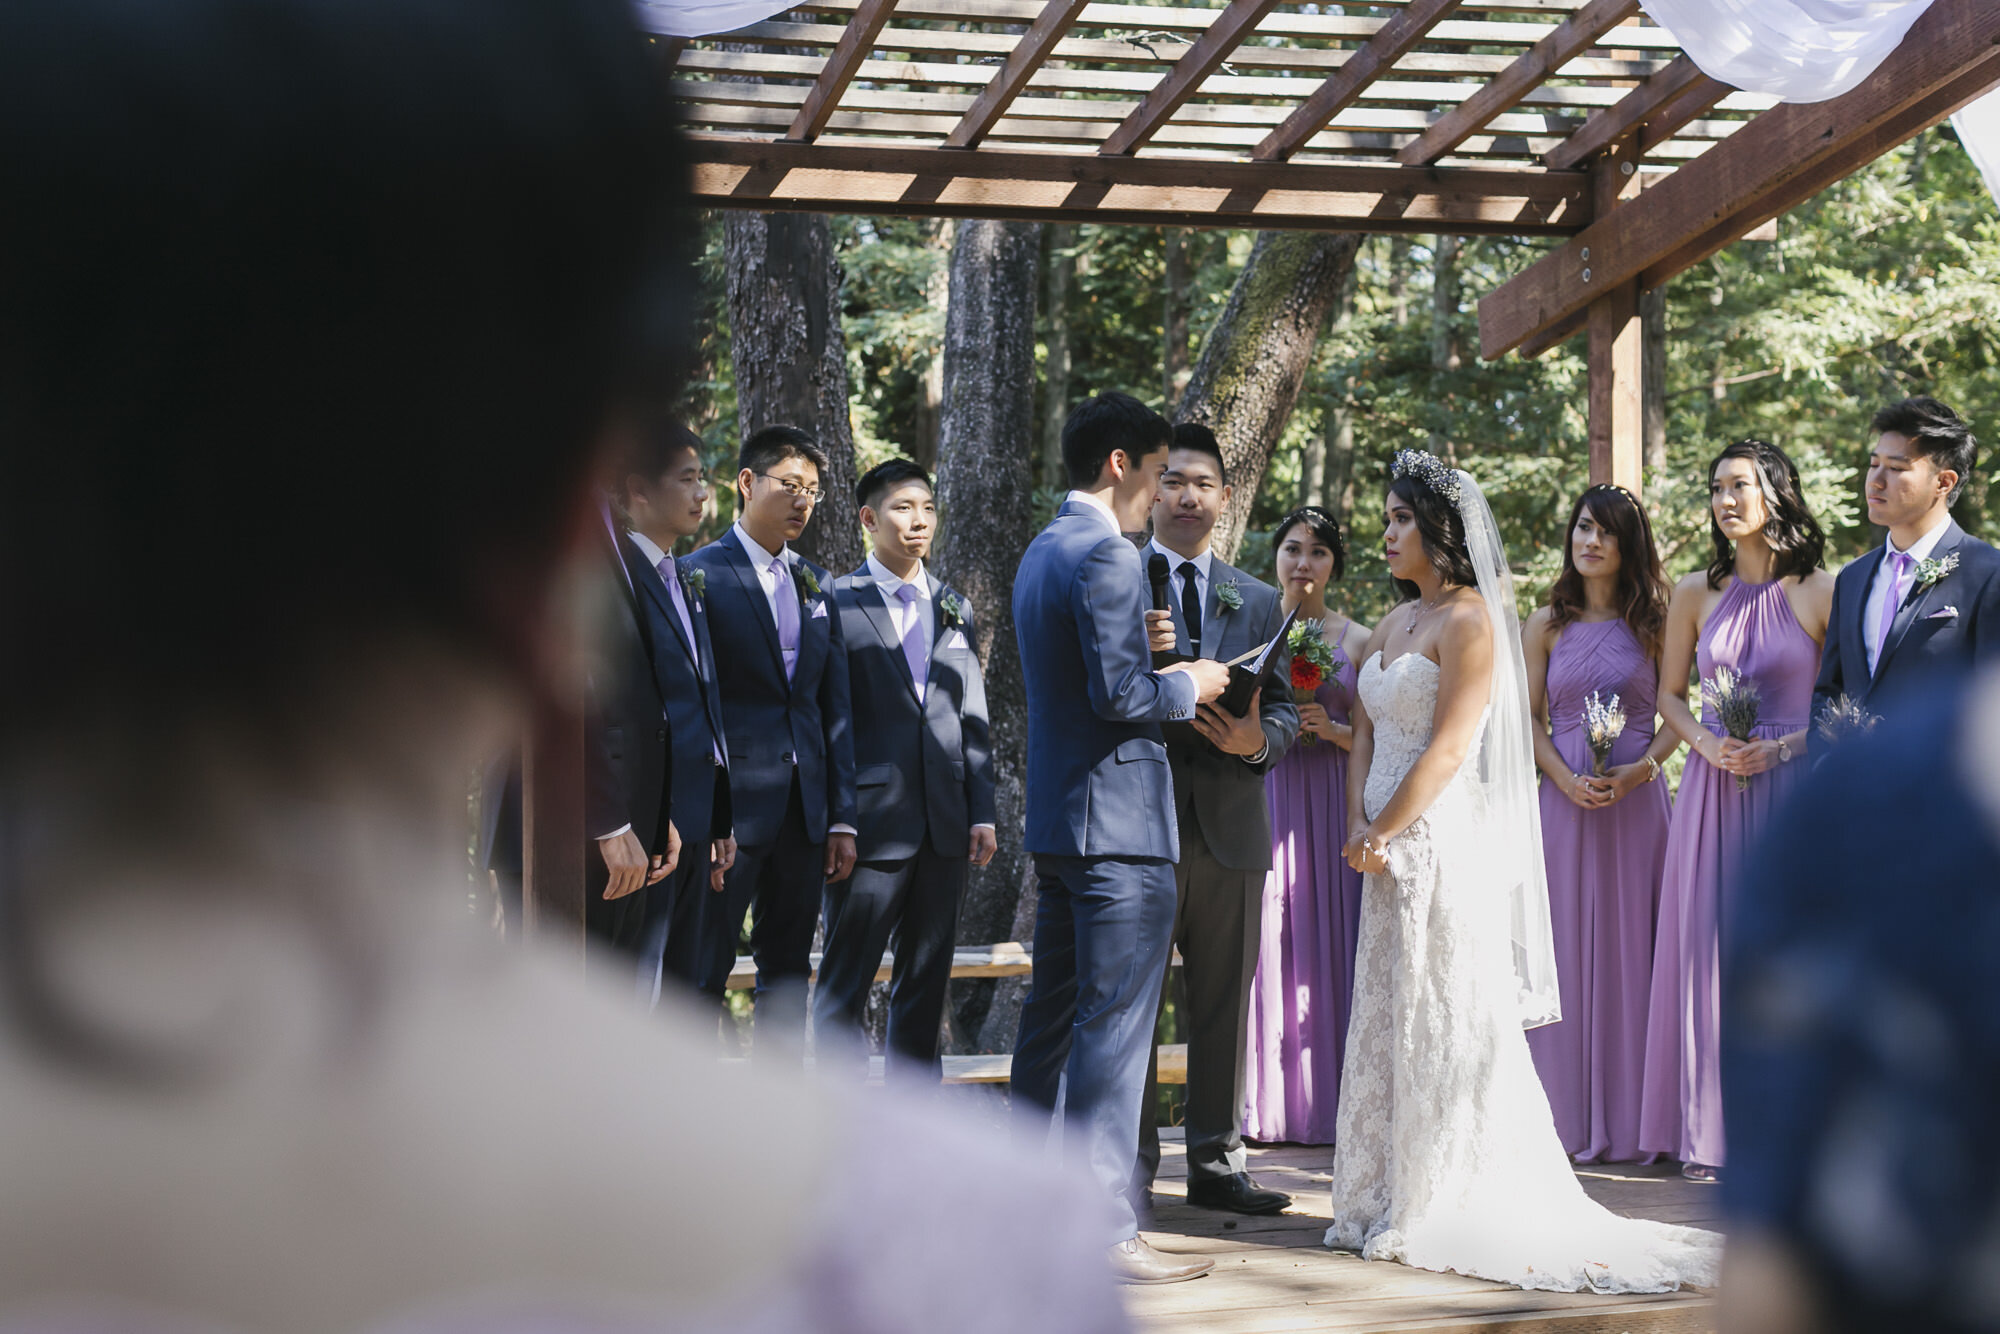 Bride and groom exchange vows on their wedding day